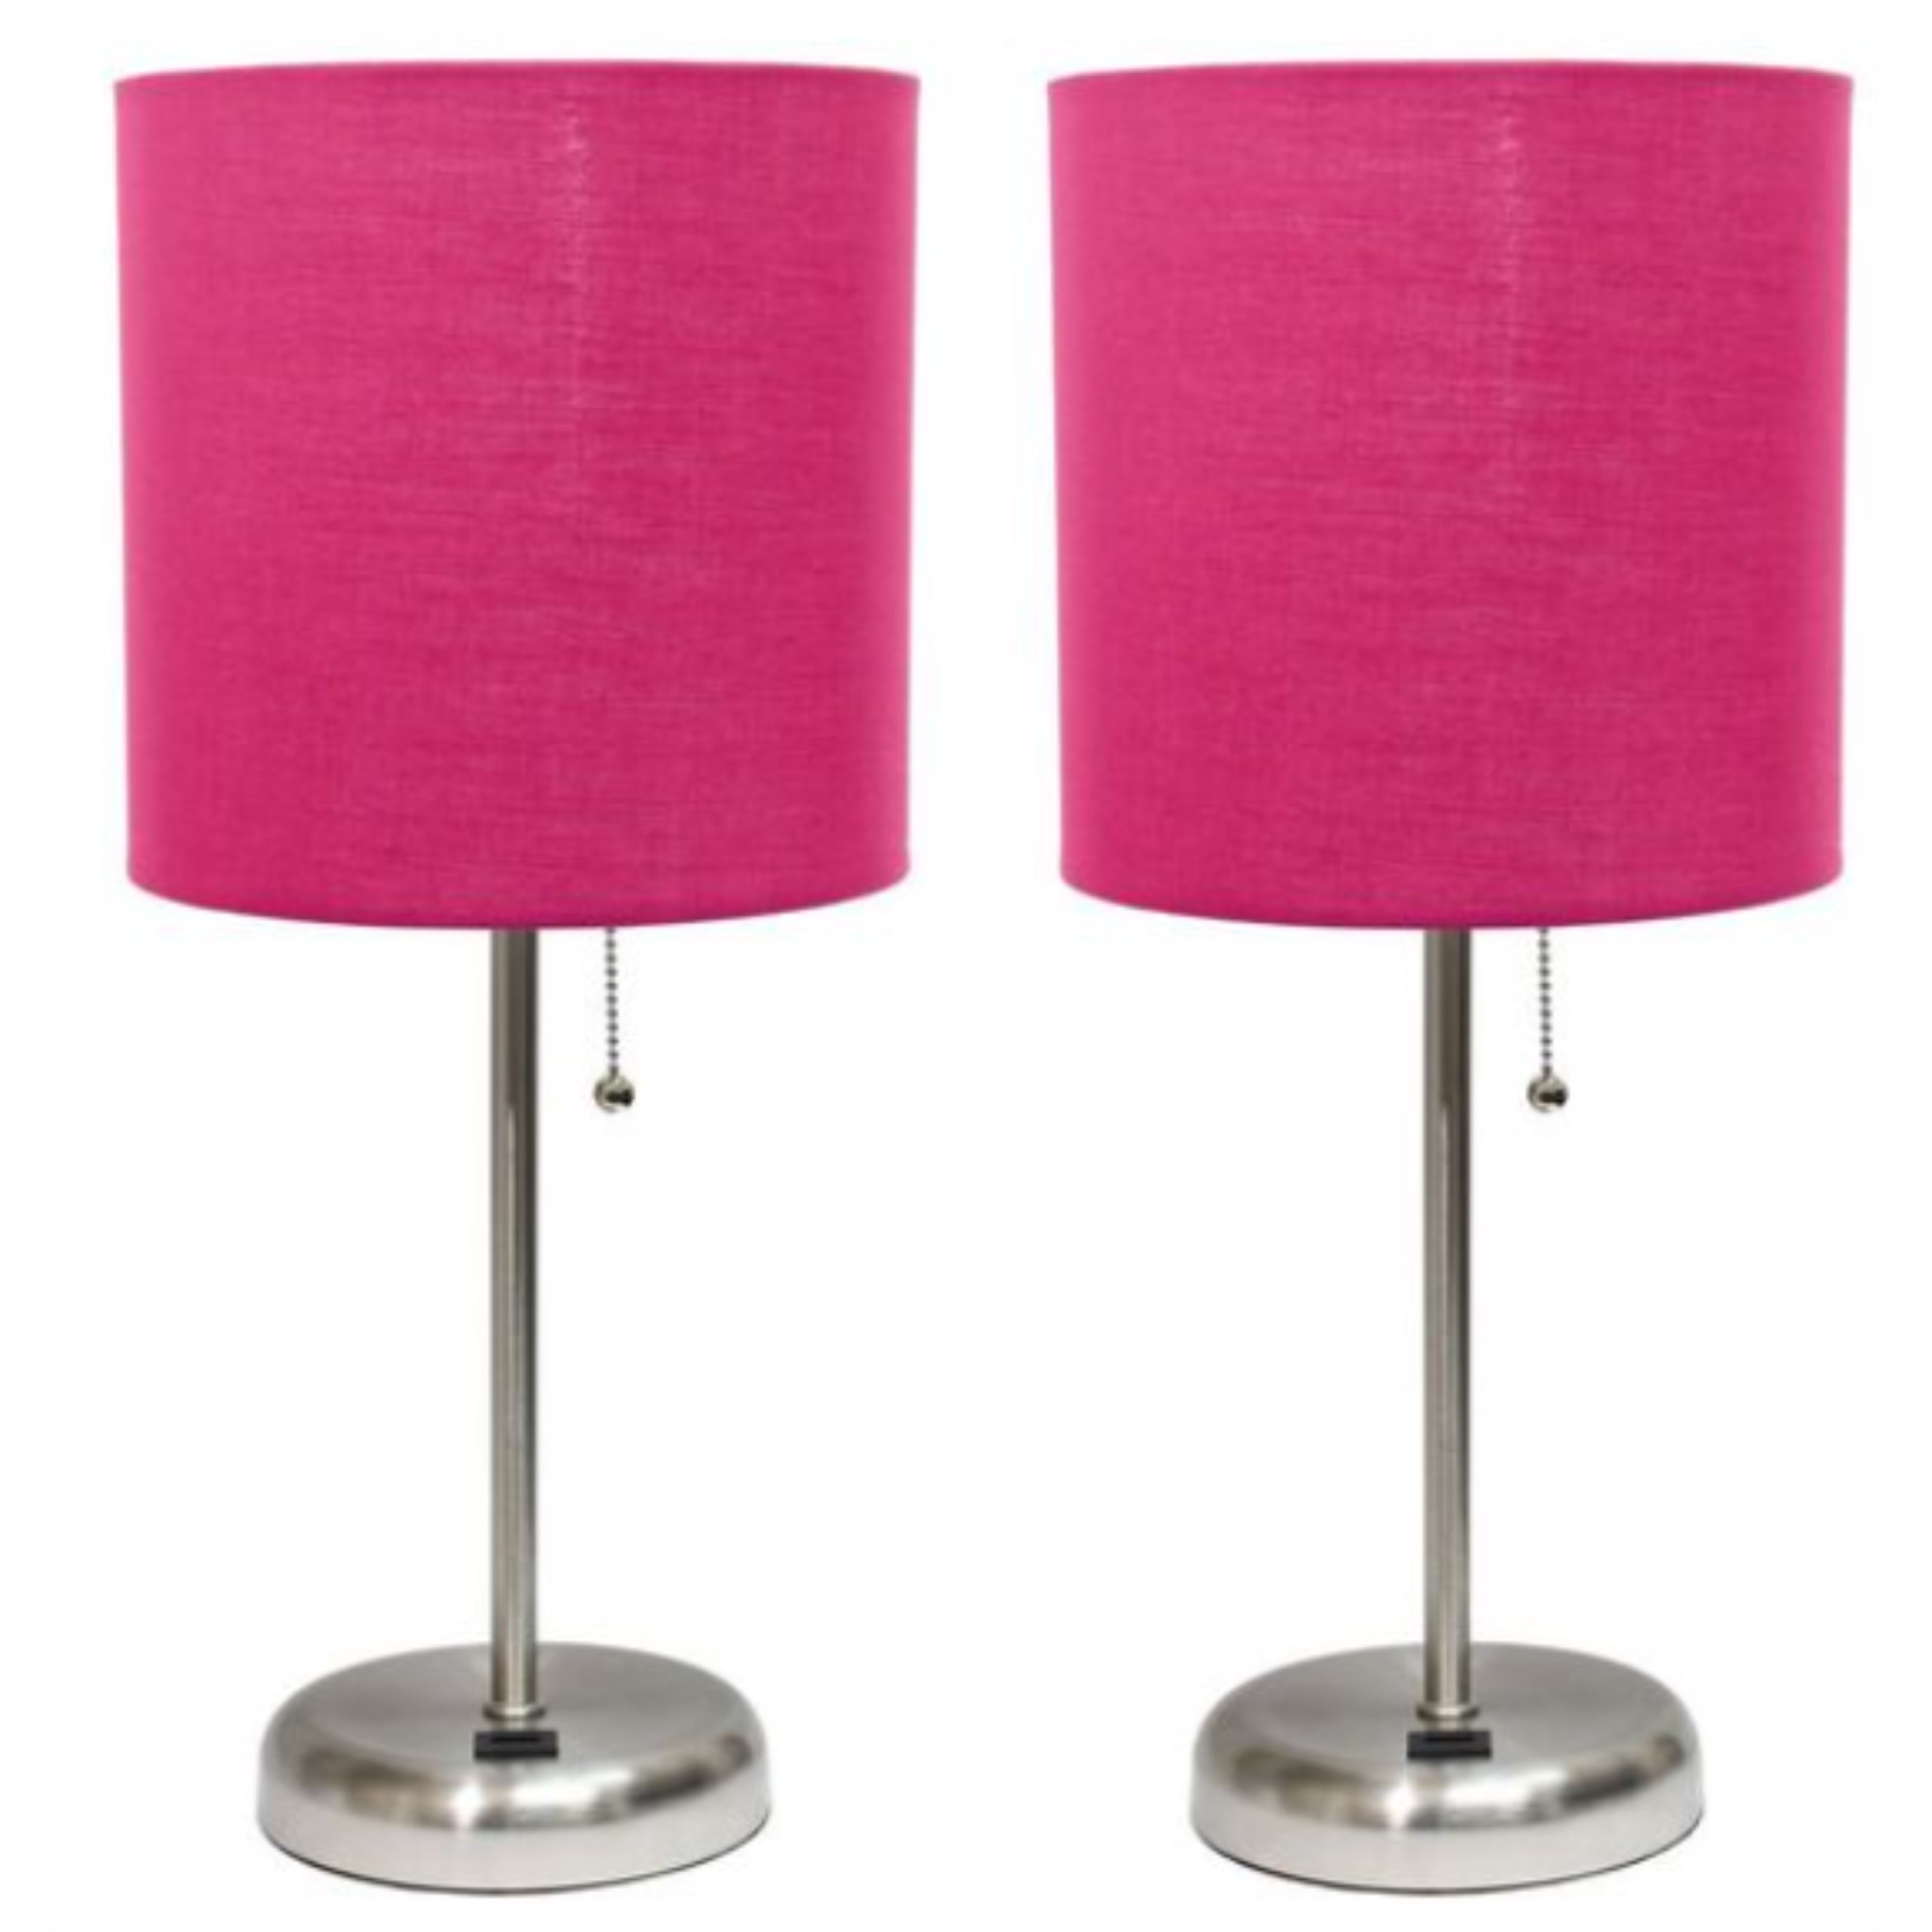 LimeLights Stick Lamp with USB charging port and Fabric Shade 2 Pack Set, Pink